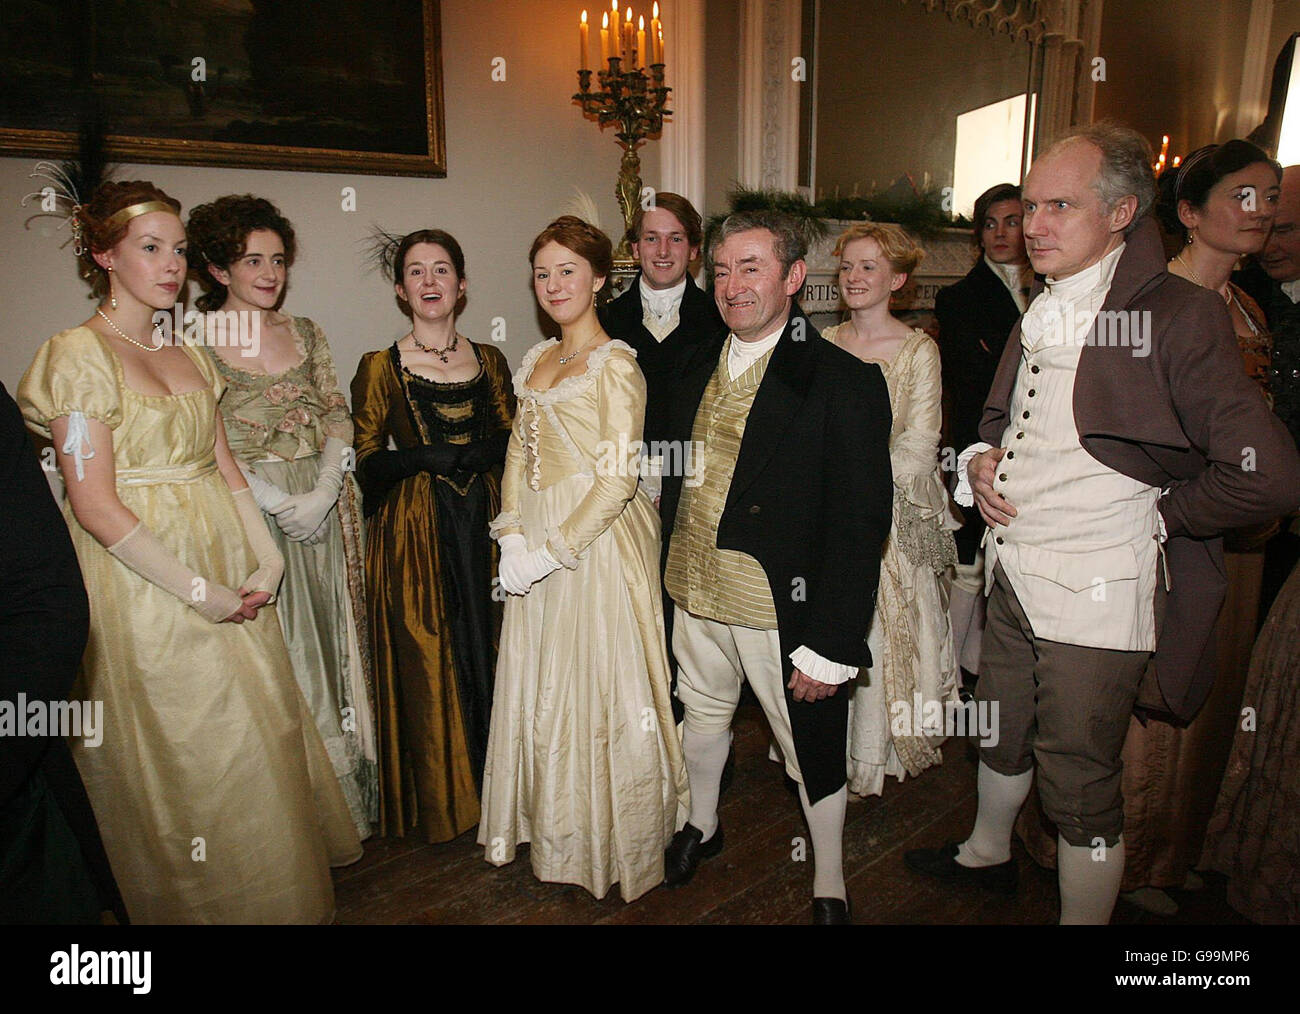 Extras in period costume on the set of Becoming Jane, at Charleville Forest Castle in the Irish midlands, starring Anne Hathaway and James McEvoy, where 100 extras in period costume dress gathered to film the ballroom scene. Stock Photo